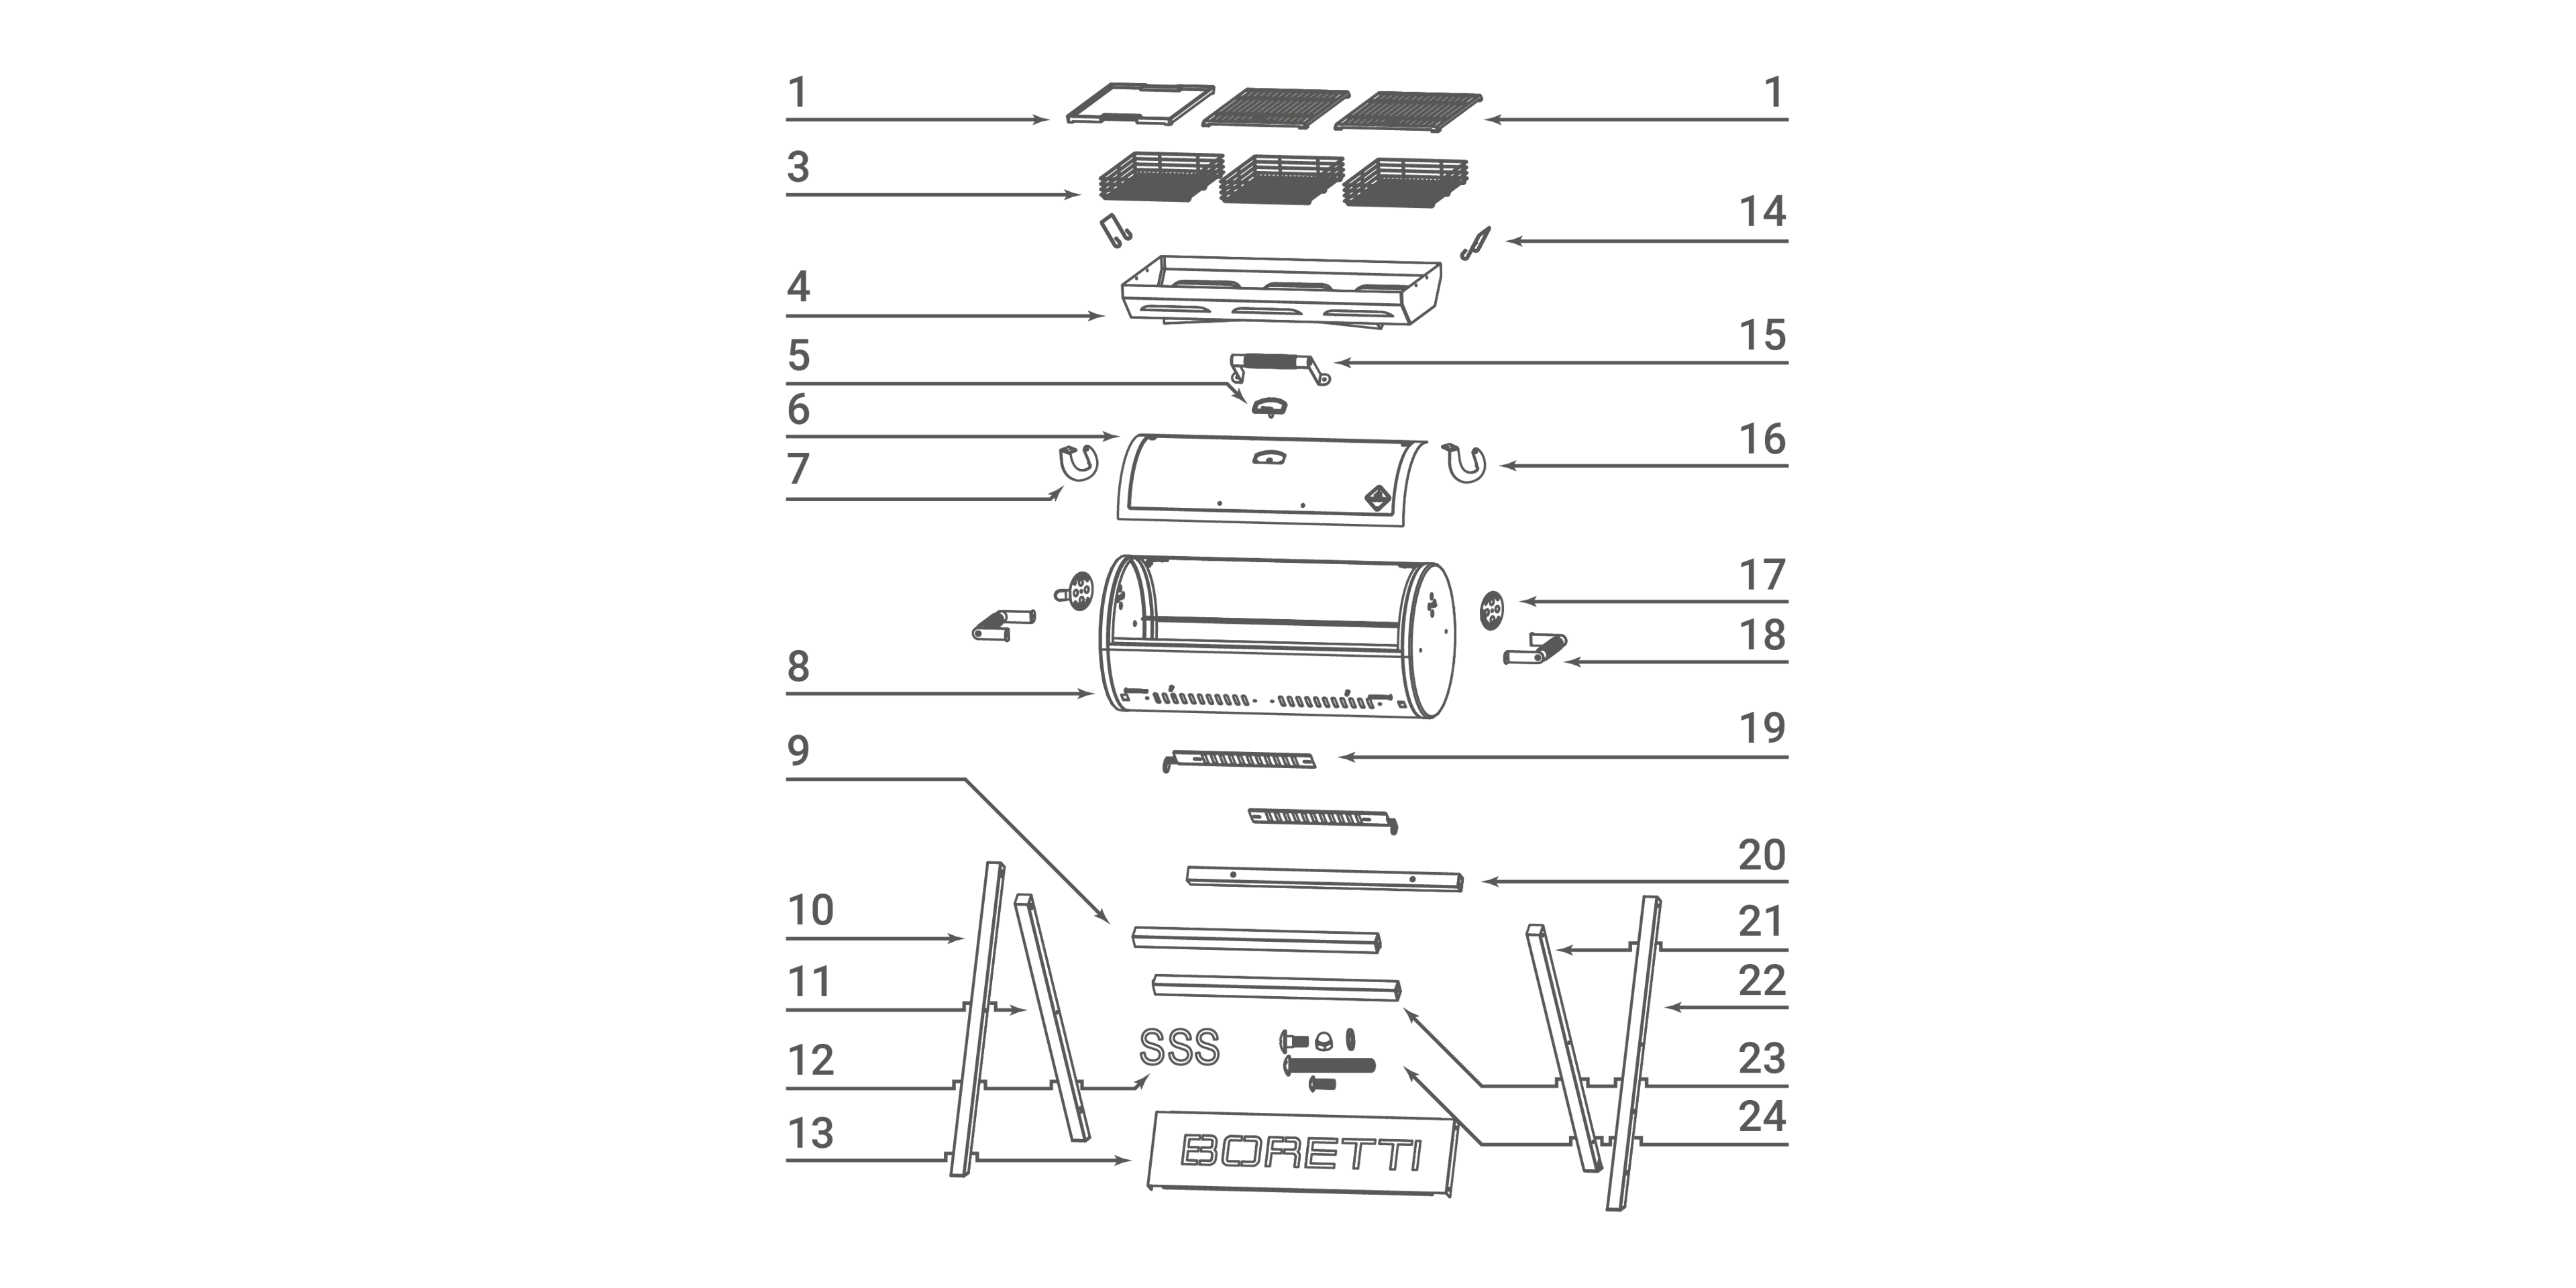 Barilo 2.0 Spareparts Exploded View